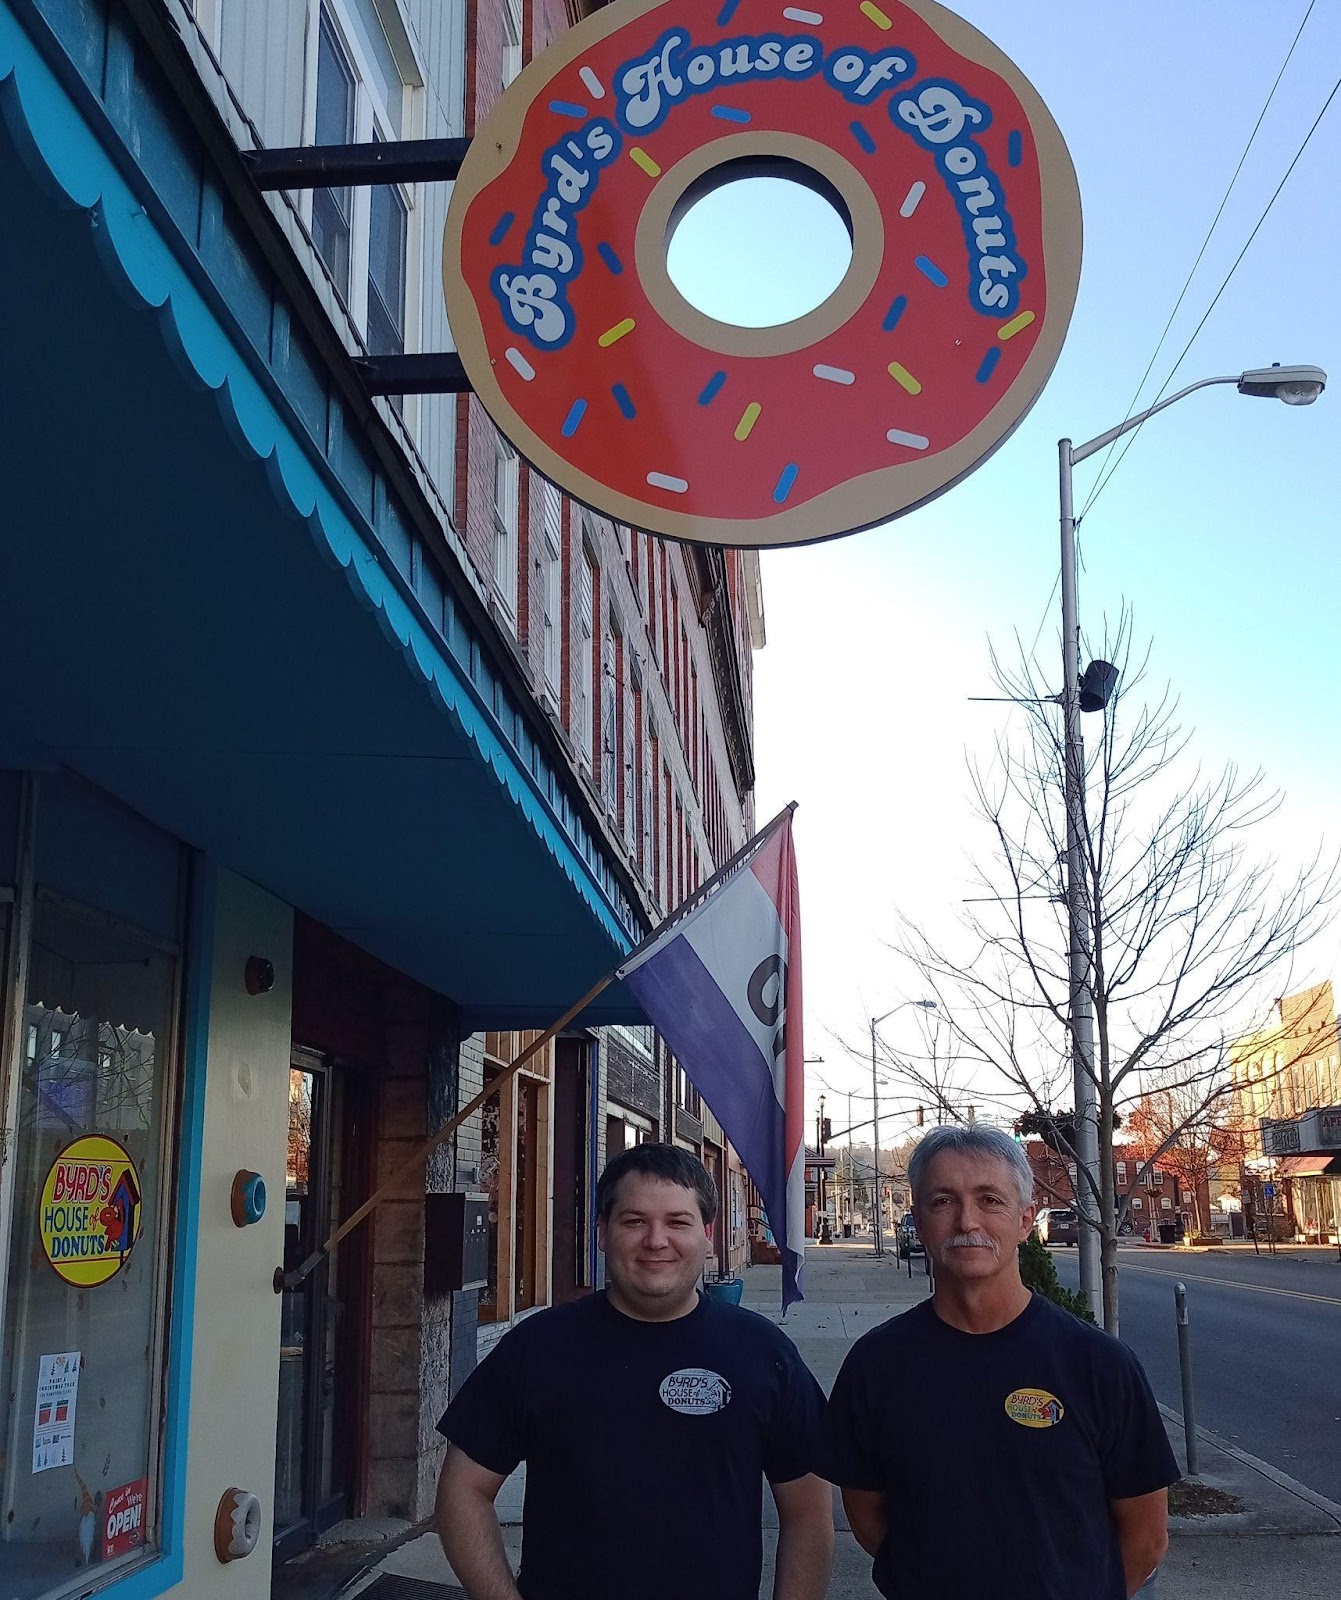 Byrd's House of Donuts: Come In! We’re Open!